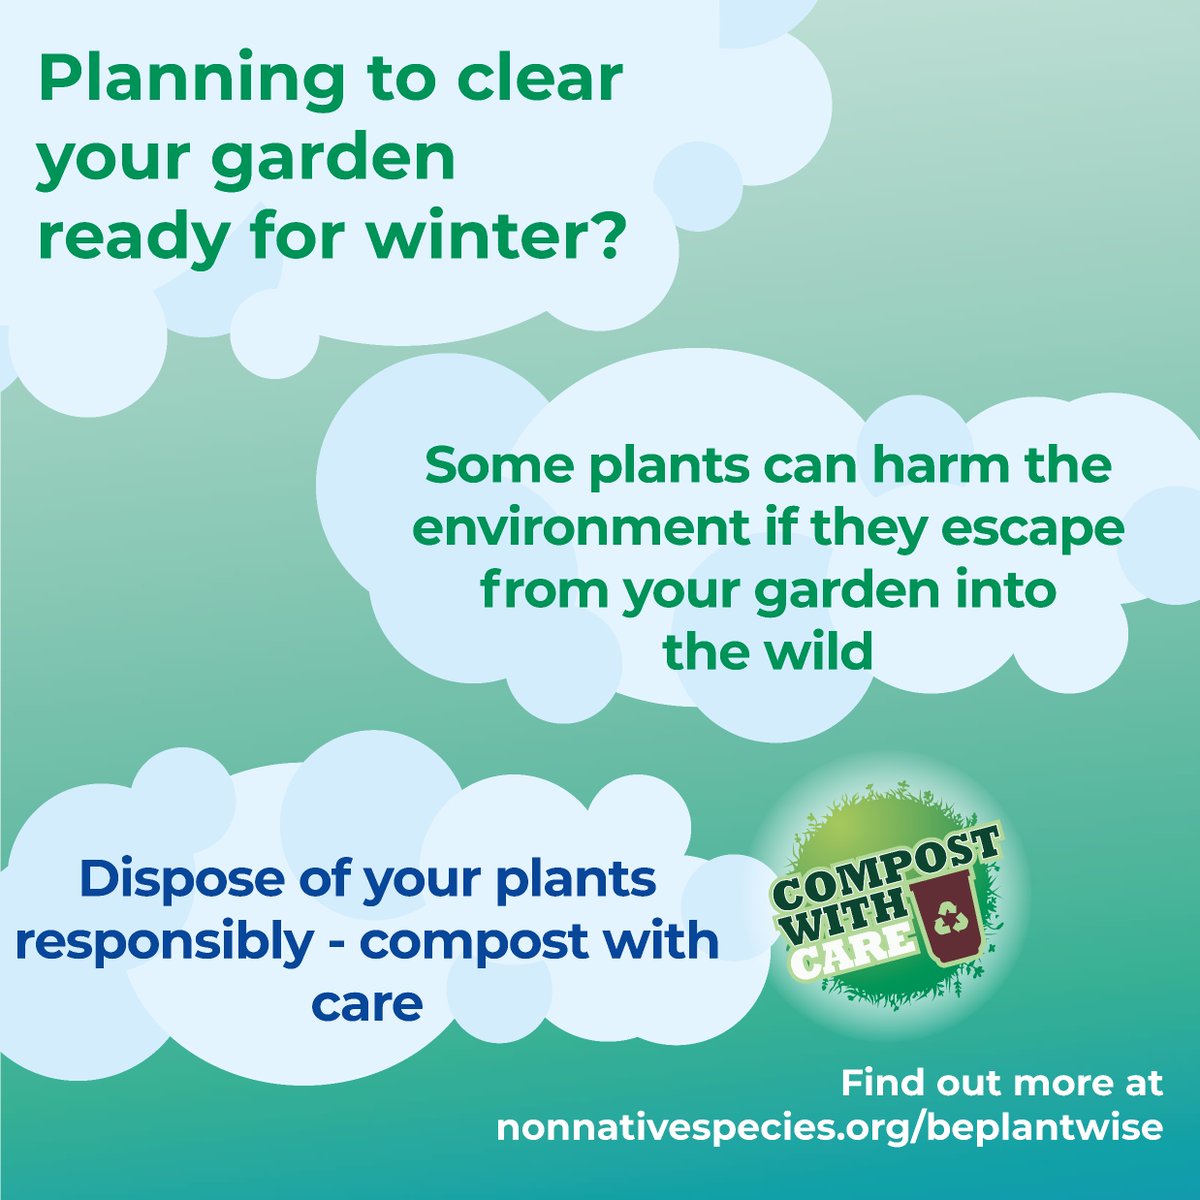 Planning to clear your garden ready for winter? 🍃🍂 Invasive non-native plants can harm the environment if they escape from your garden into the wild You can help! Dispose of your plants responsibly, compost with care ♻️🌱 Find out more nonnativespecies.org/beplantwise #BePlantWise